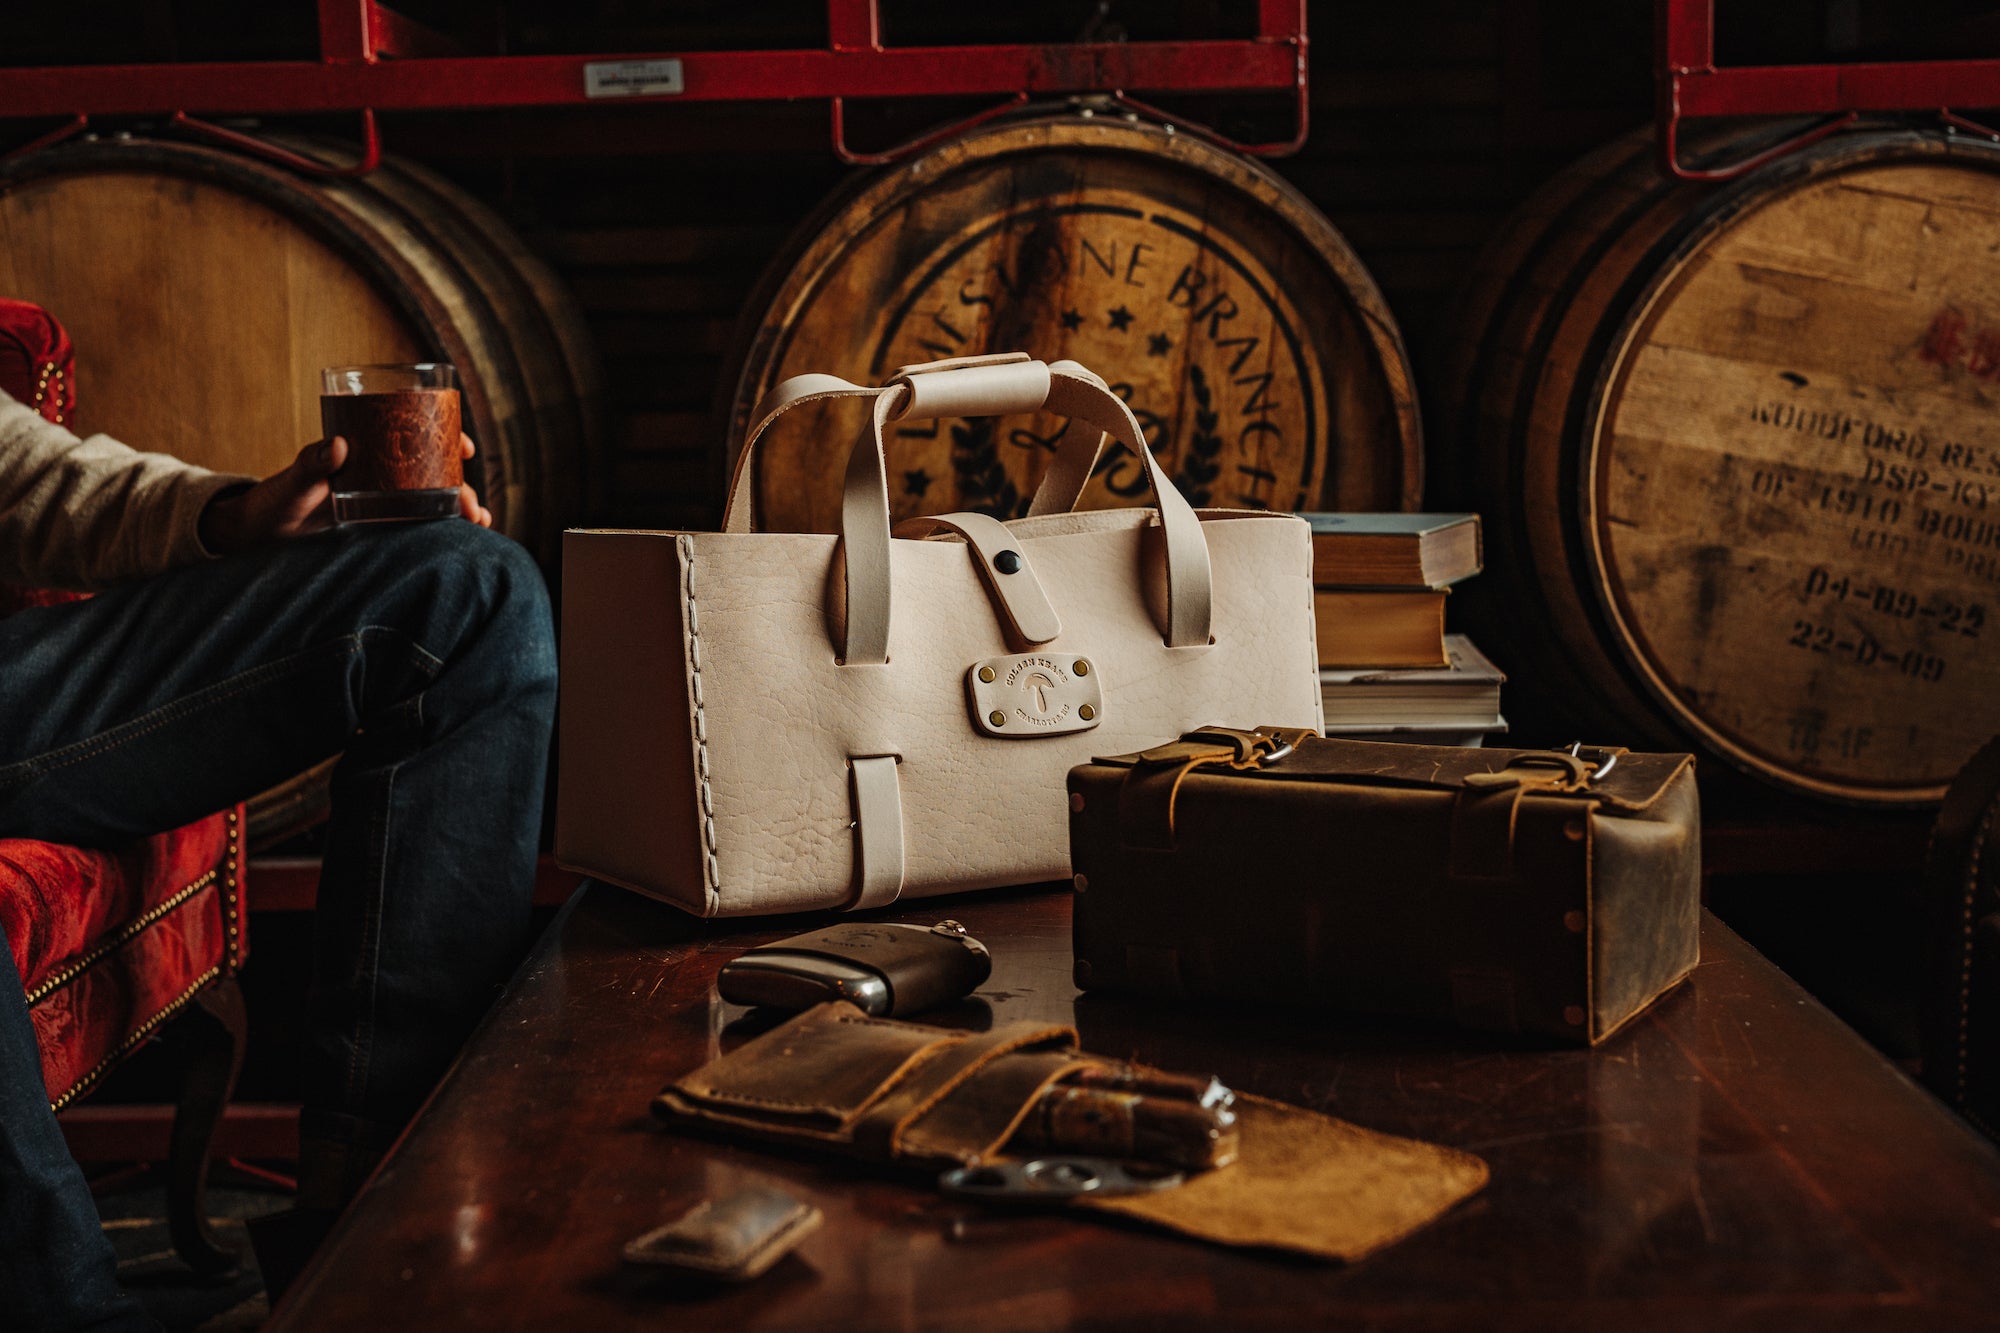 New season Kompanero leather hand bags have arrived: Soul Nelson